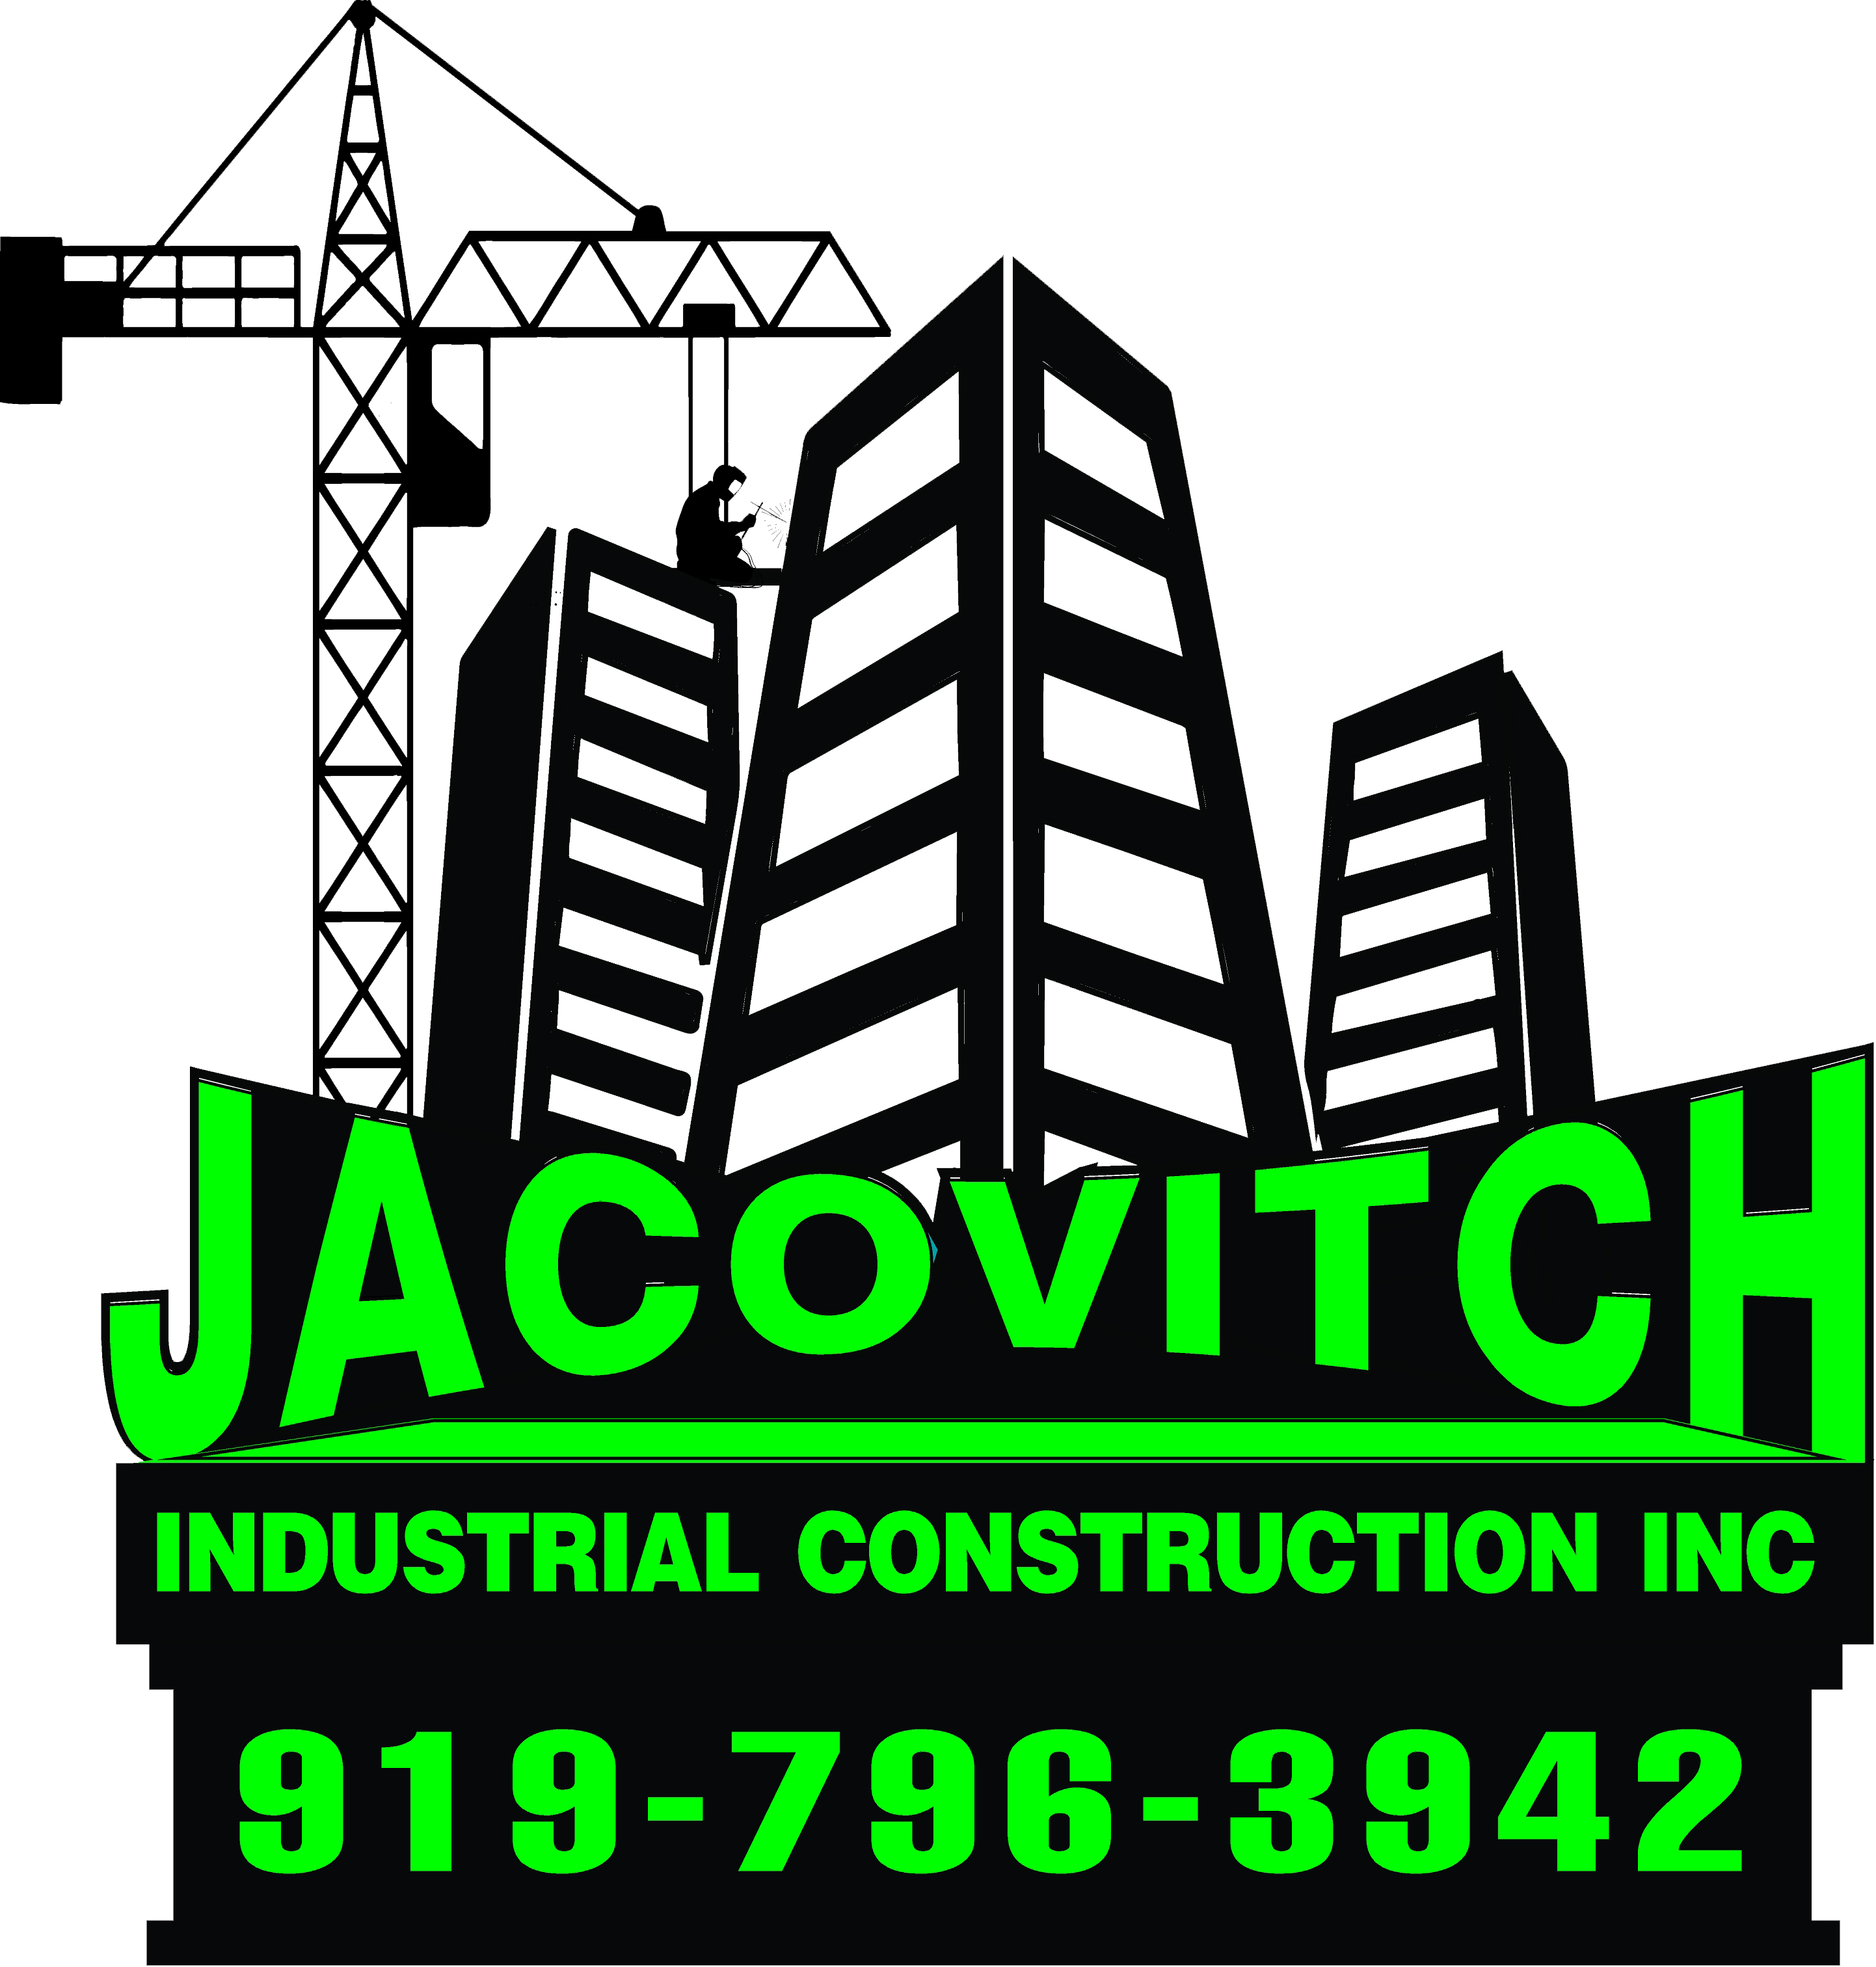 Jacovitch Industrial Construction